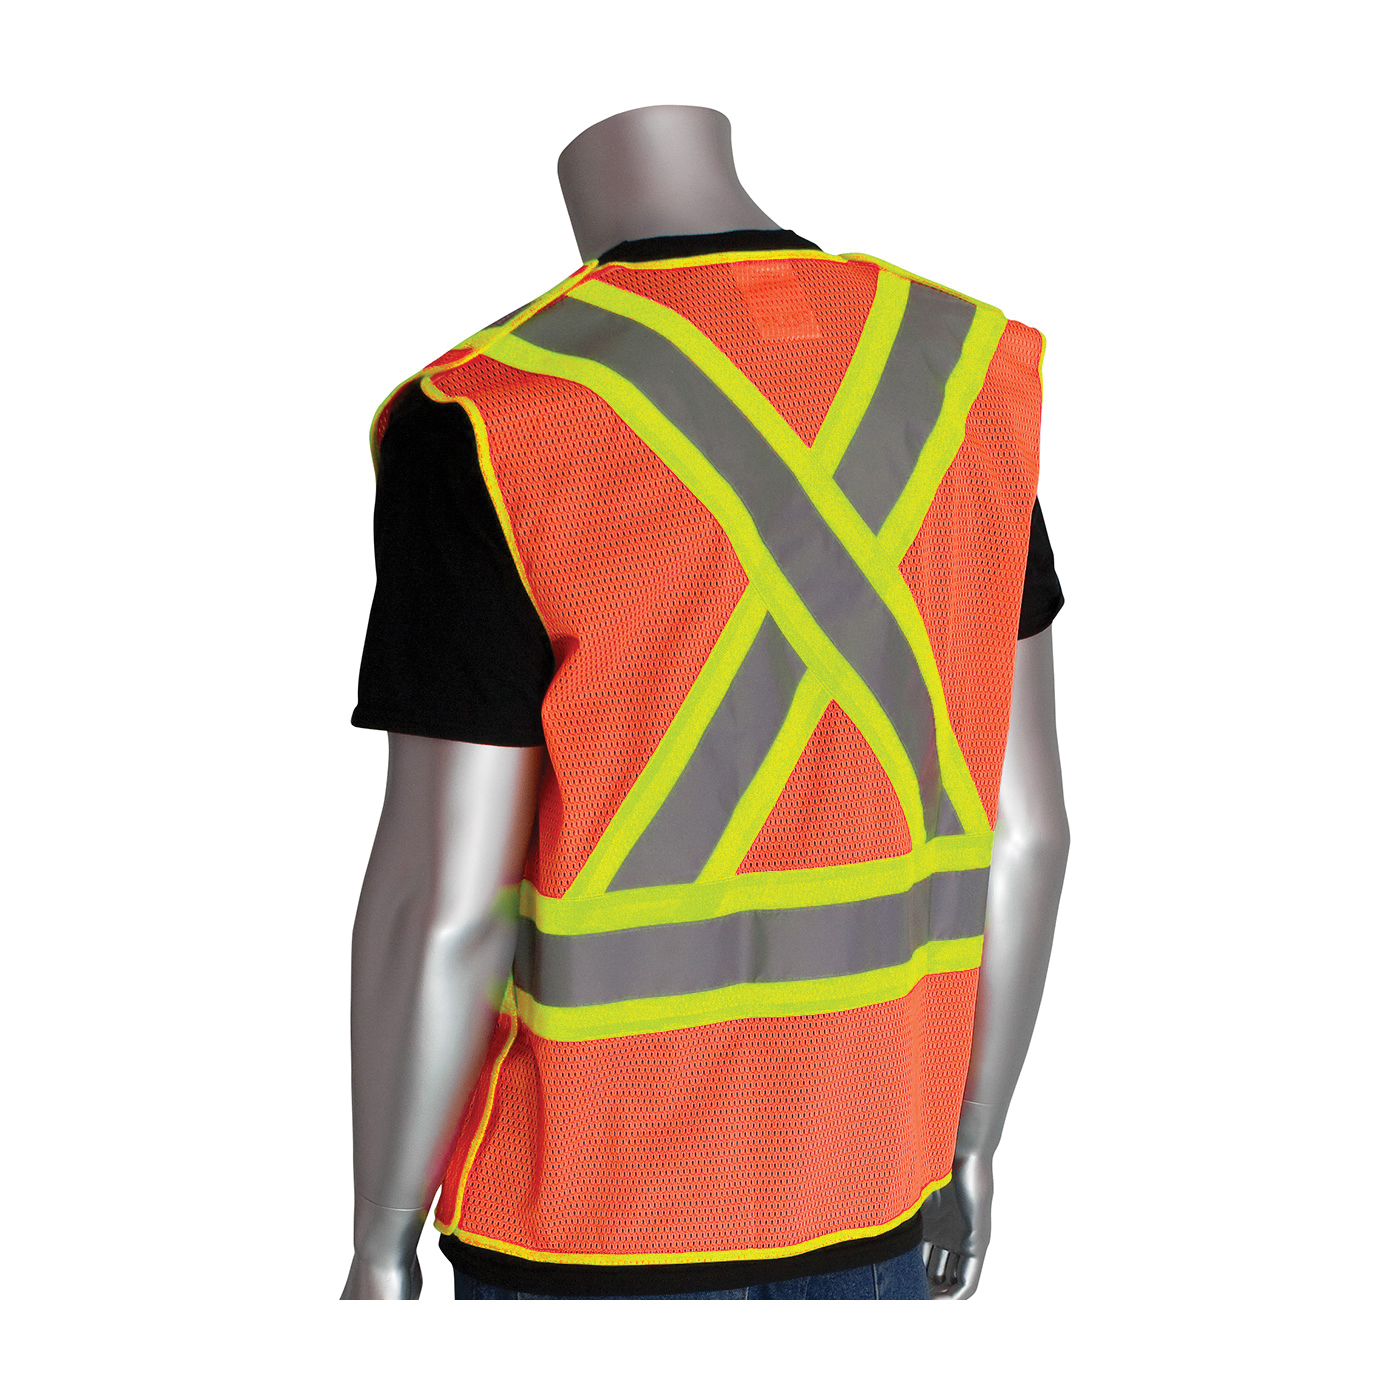 PIP® 302-0211-OR/L 2-Tone X-Back Safety Vest, L, Hi-Viz Orange, Polyester Mesh, Hook and Loop Closure, 5 Pockets, ANSI Class: Class 2, Specifications Met: ANSI 107 Type R, CAN/CSA Z96